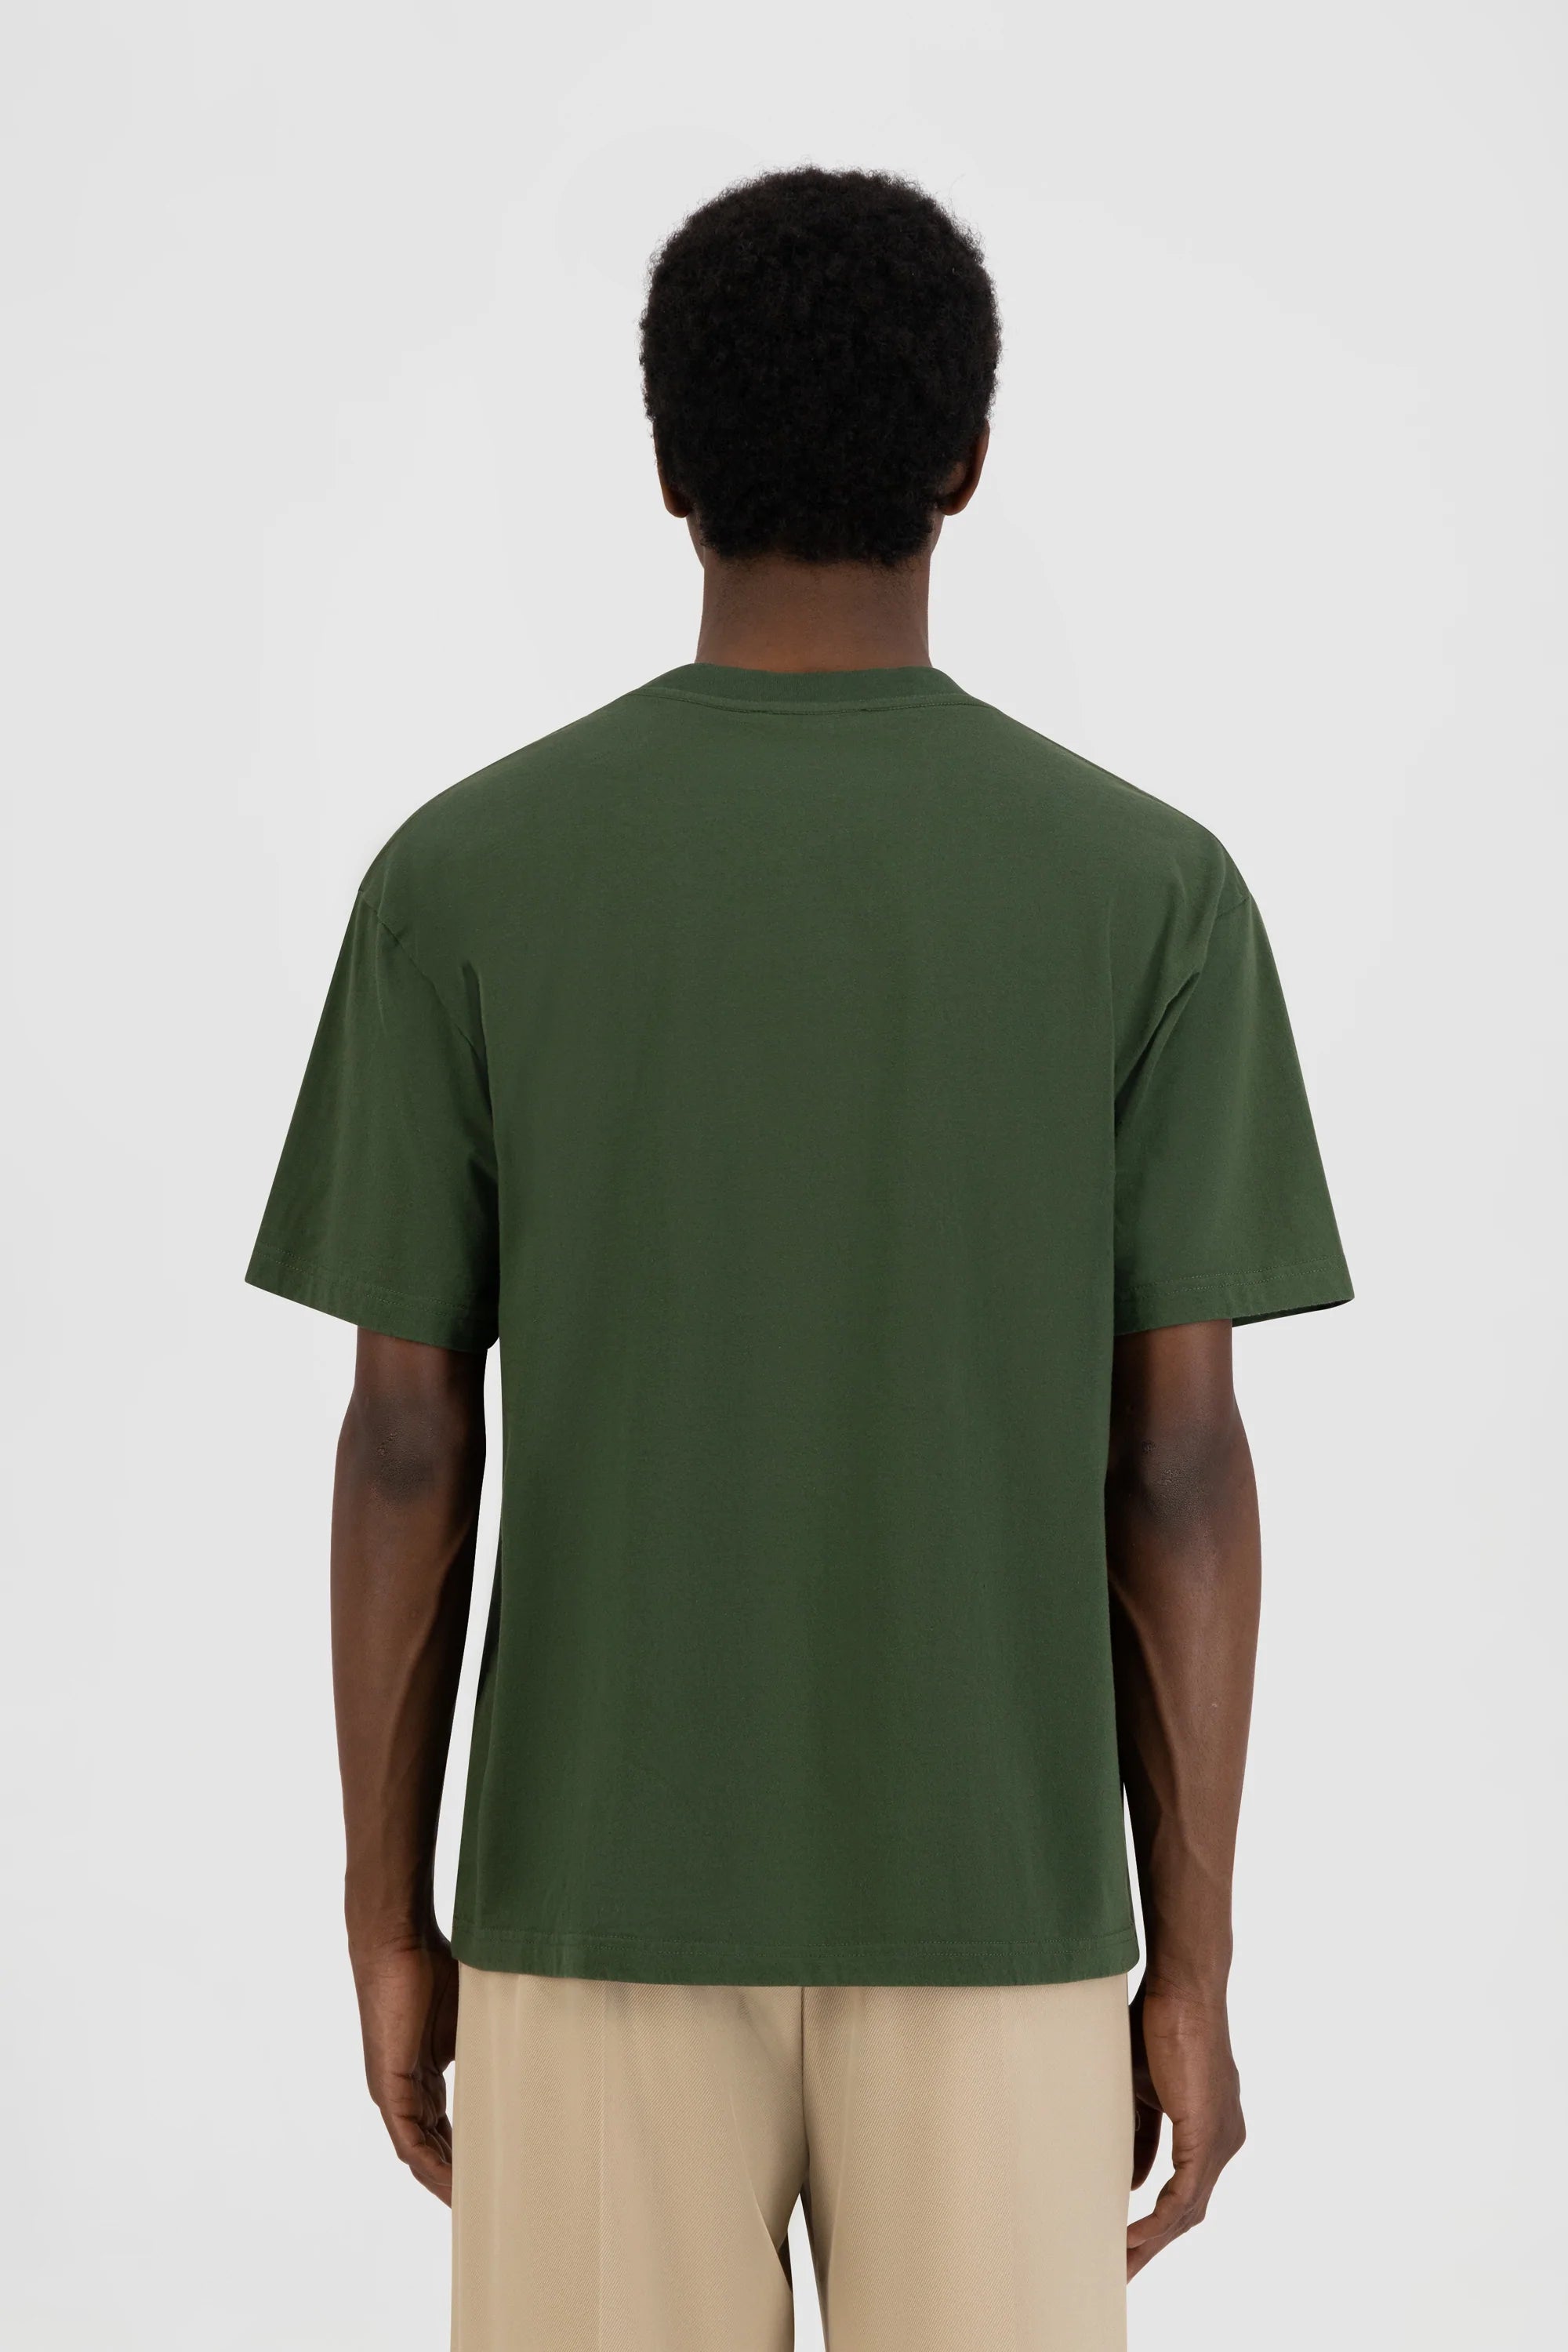 OLAF Chainstitch Tee Forest Green